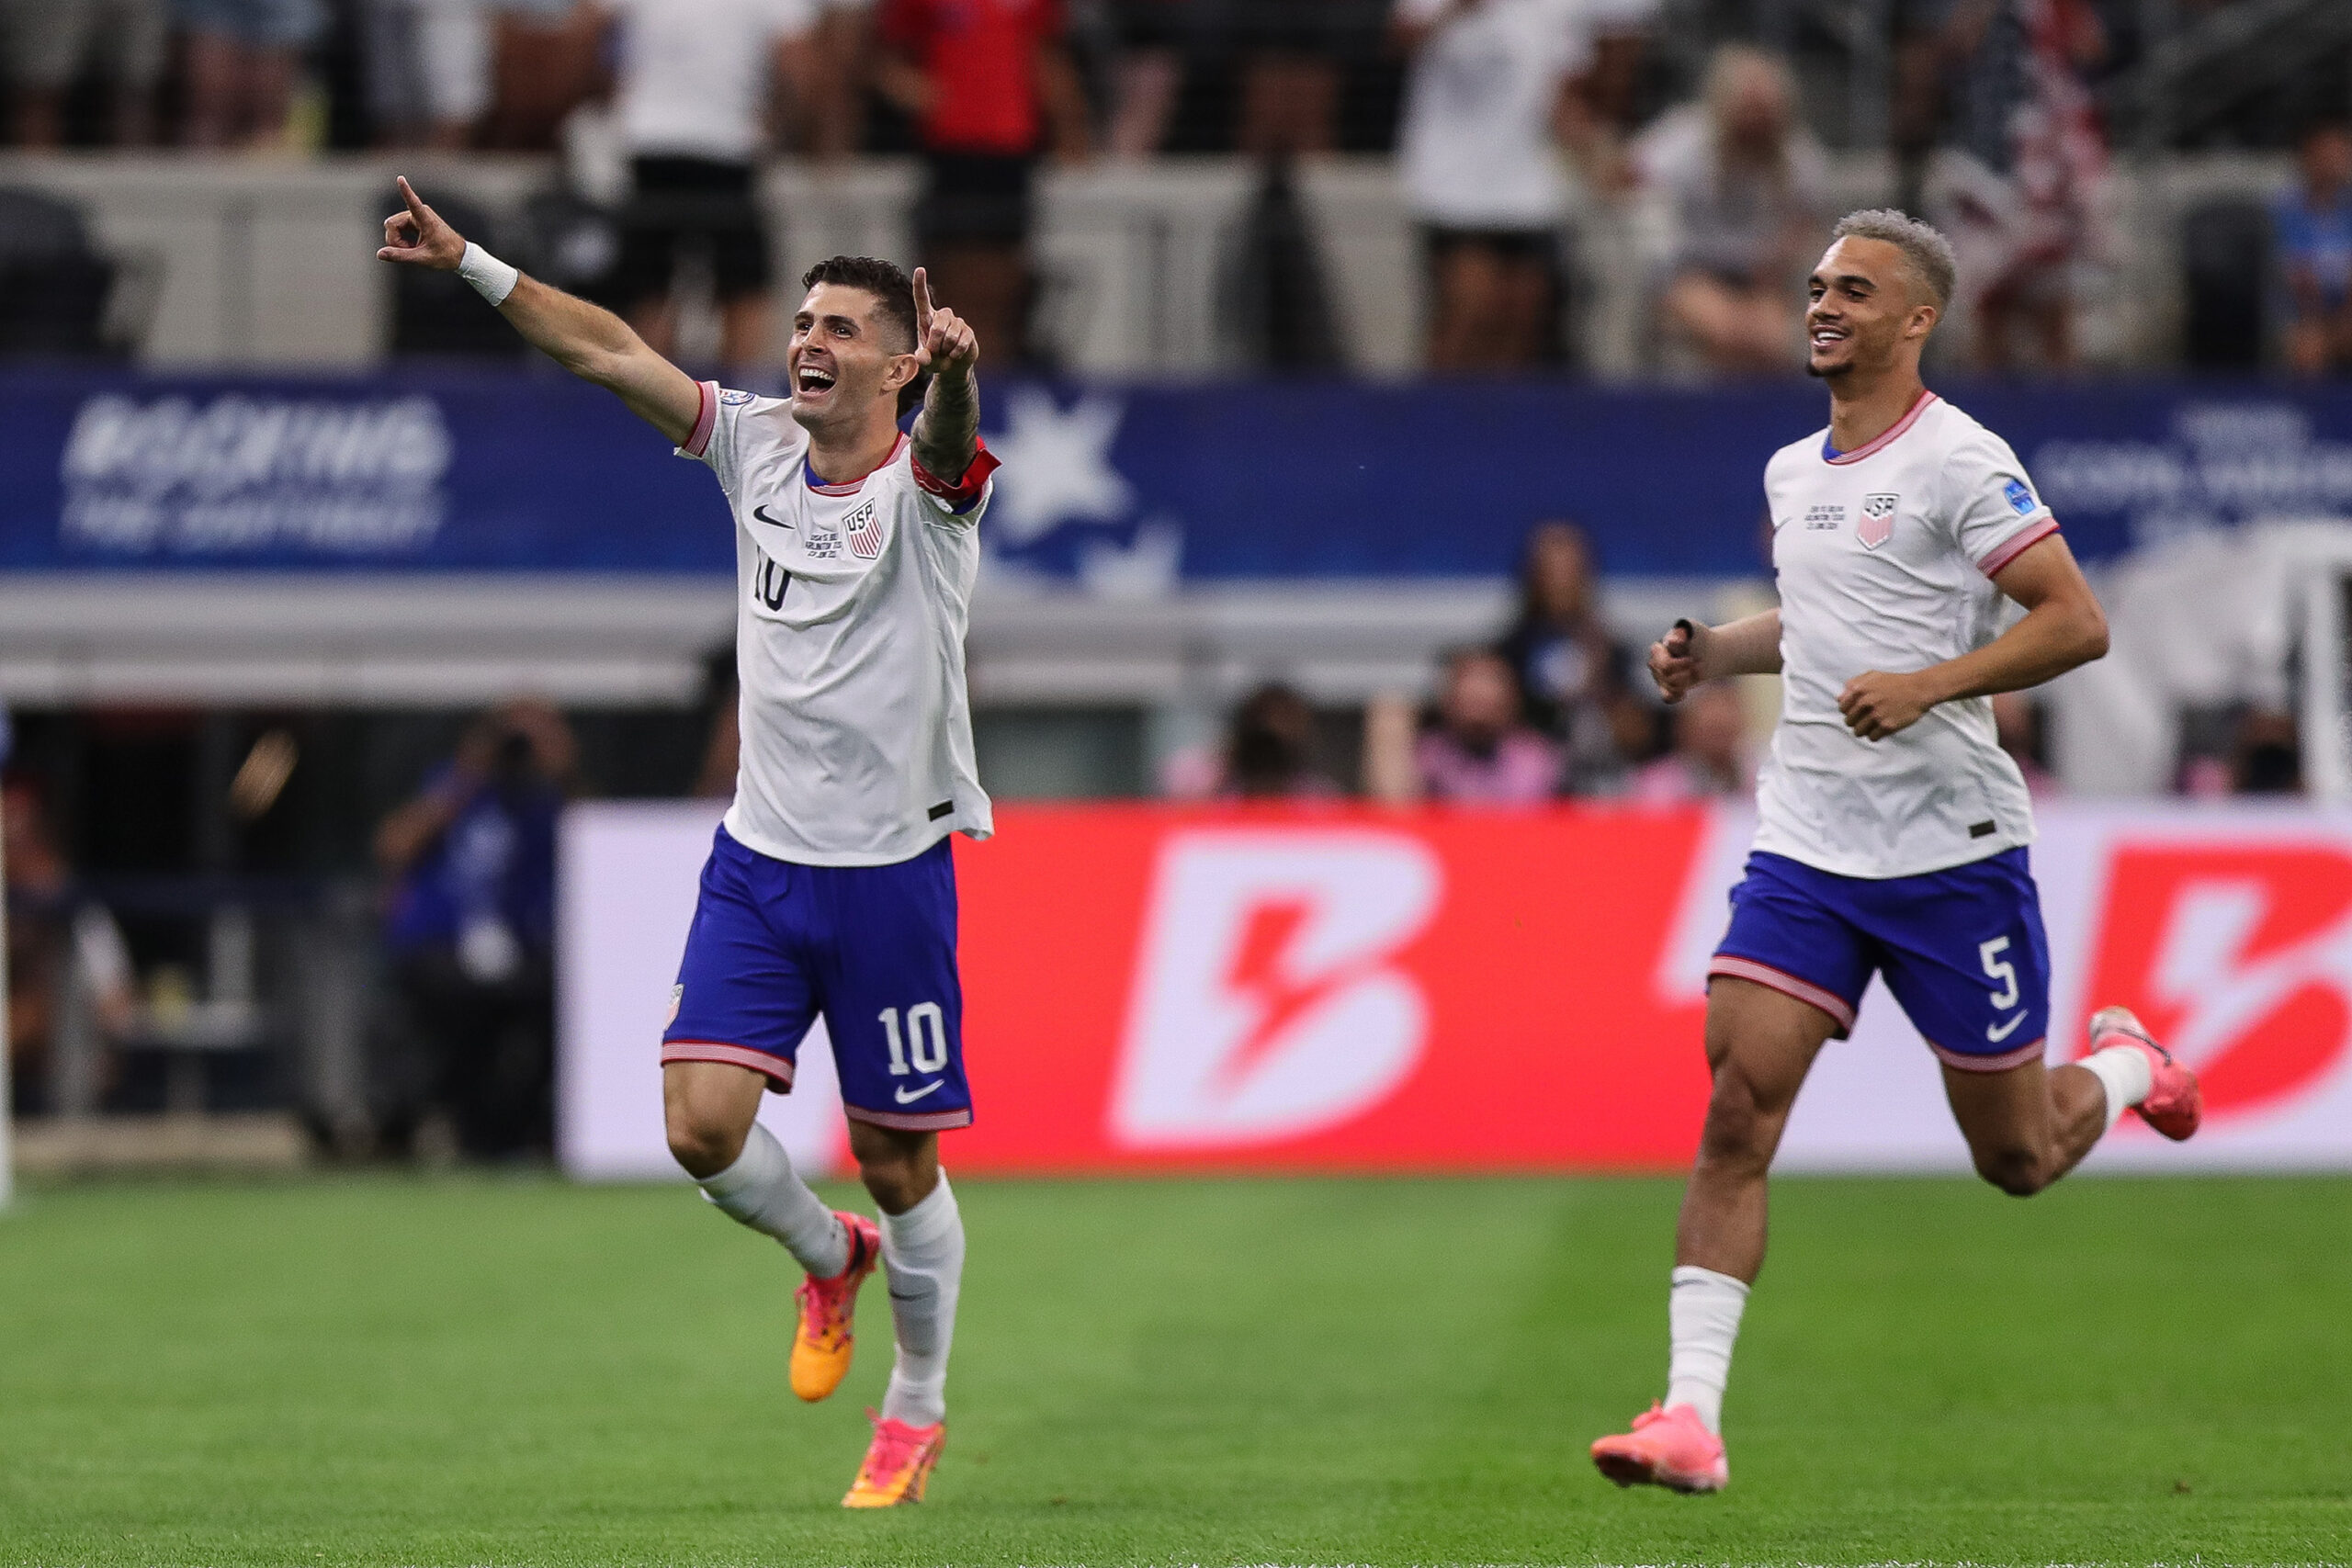 United States 2-0 Bolivia Stats: Pulisic Powers Hosts to Convincing Win in Copa America Opener